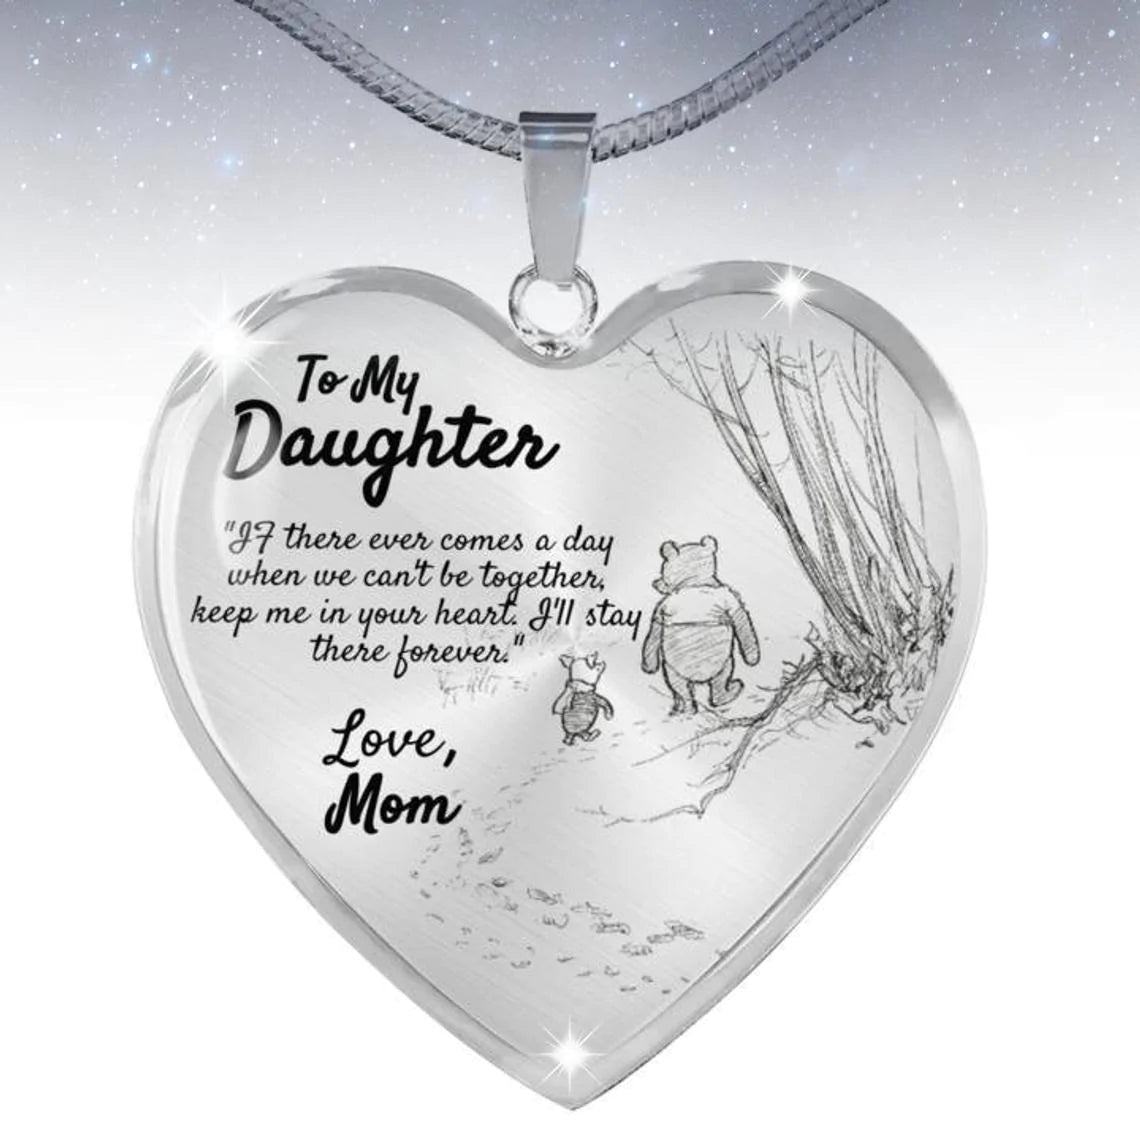 For Daughter - I'll Stay There Forever Heart Necklace-37bracelet